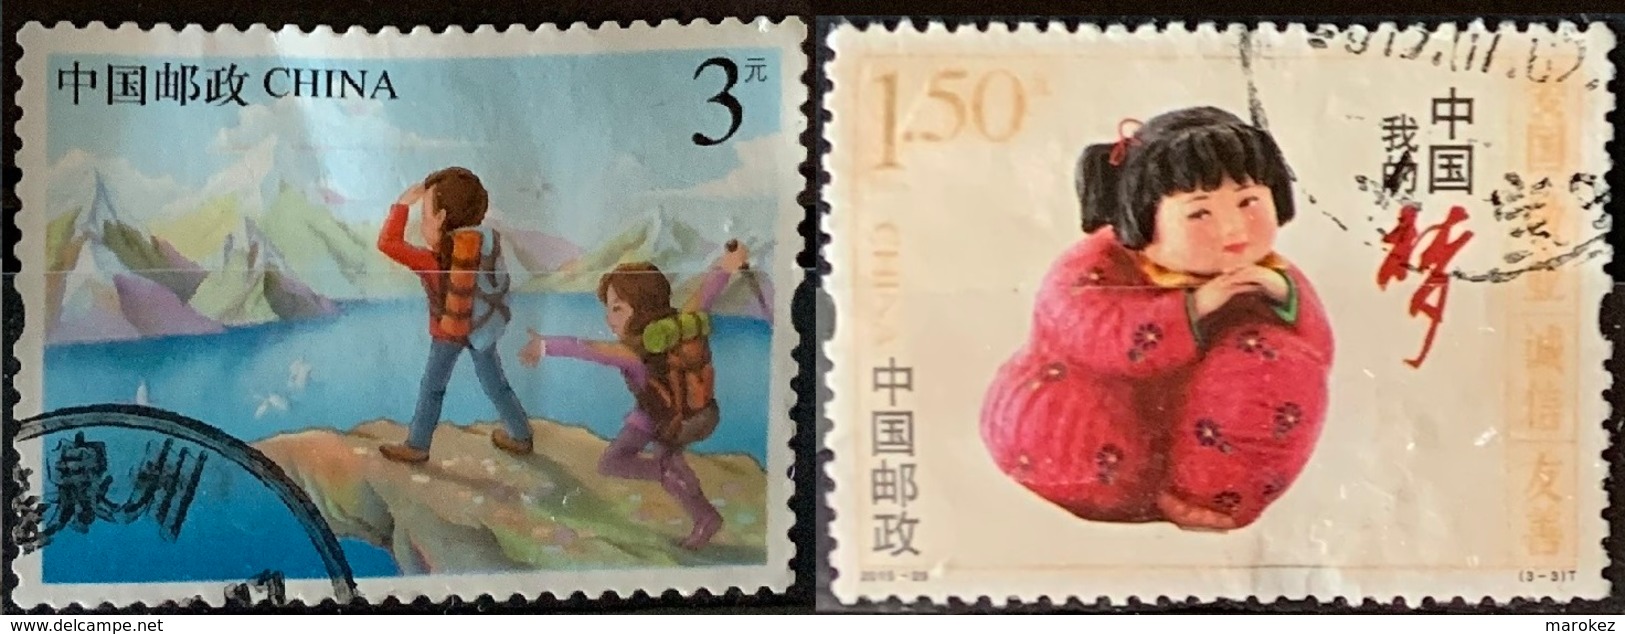 CHINA PRC 2015 Tourism & Nationalist Values 2 Postally Used Stamps MICHEL # 4677,4783 - Oblitérés